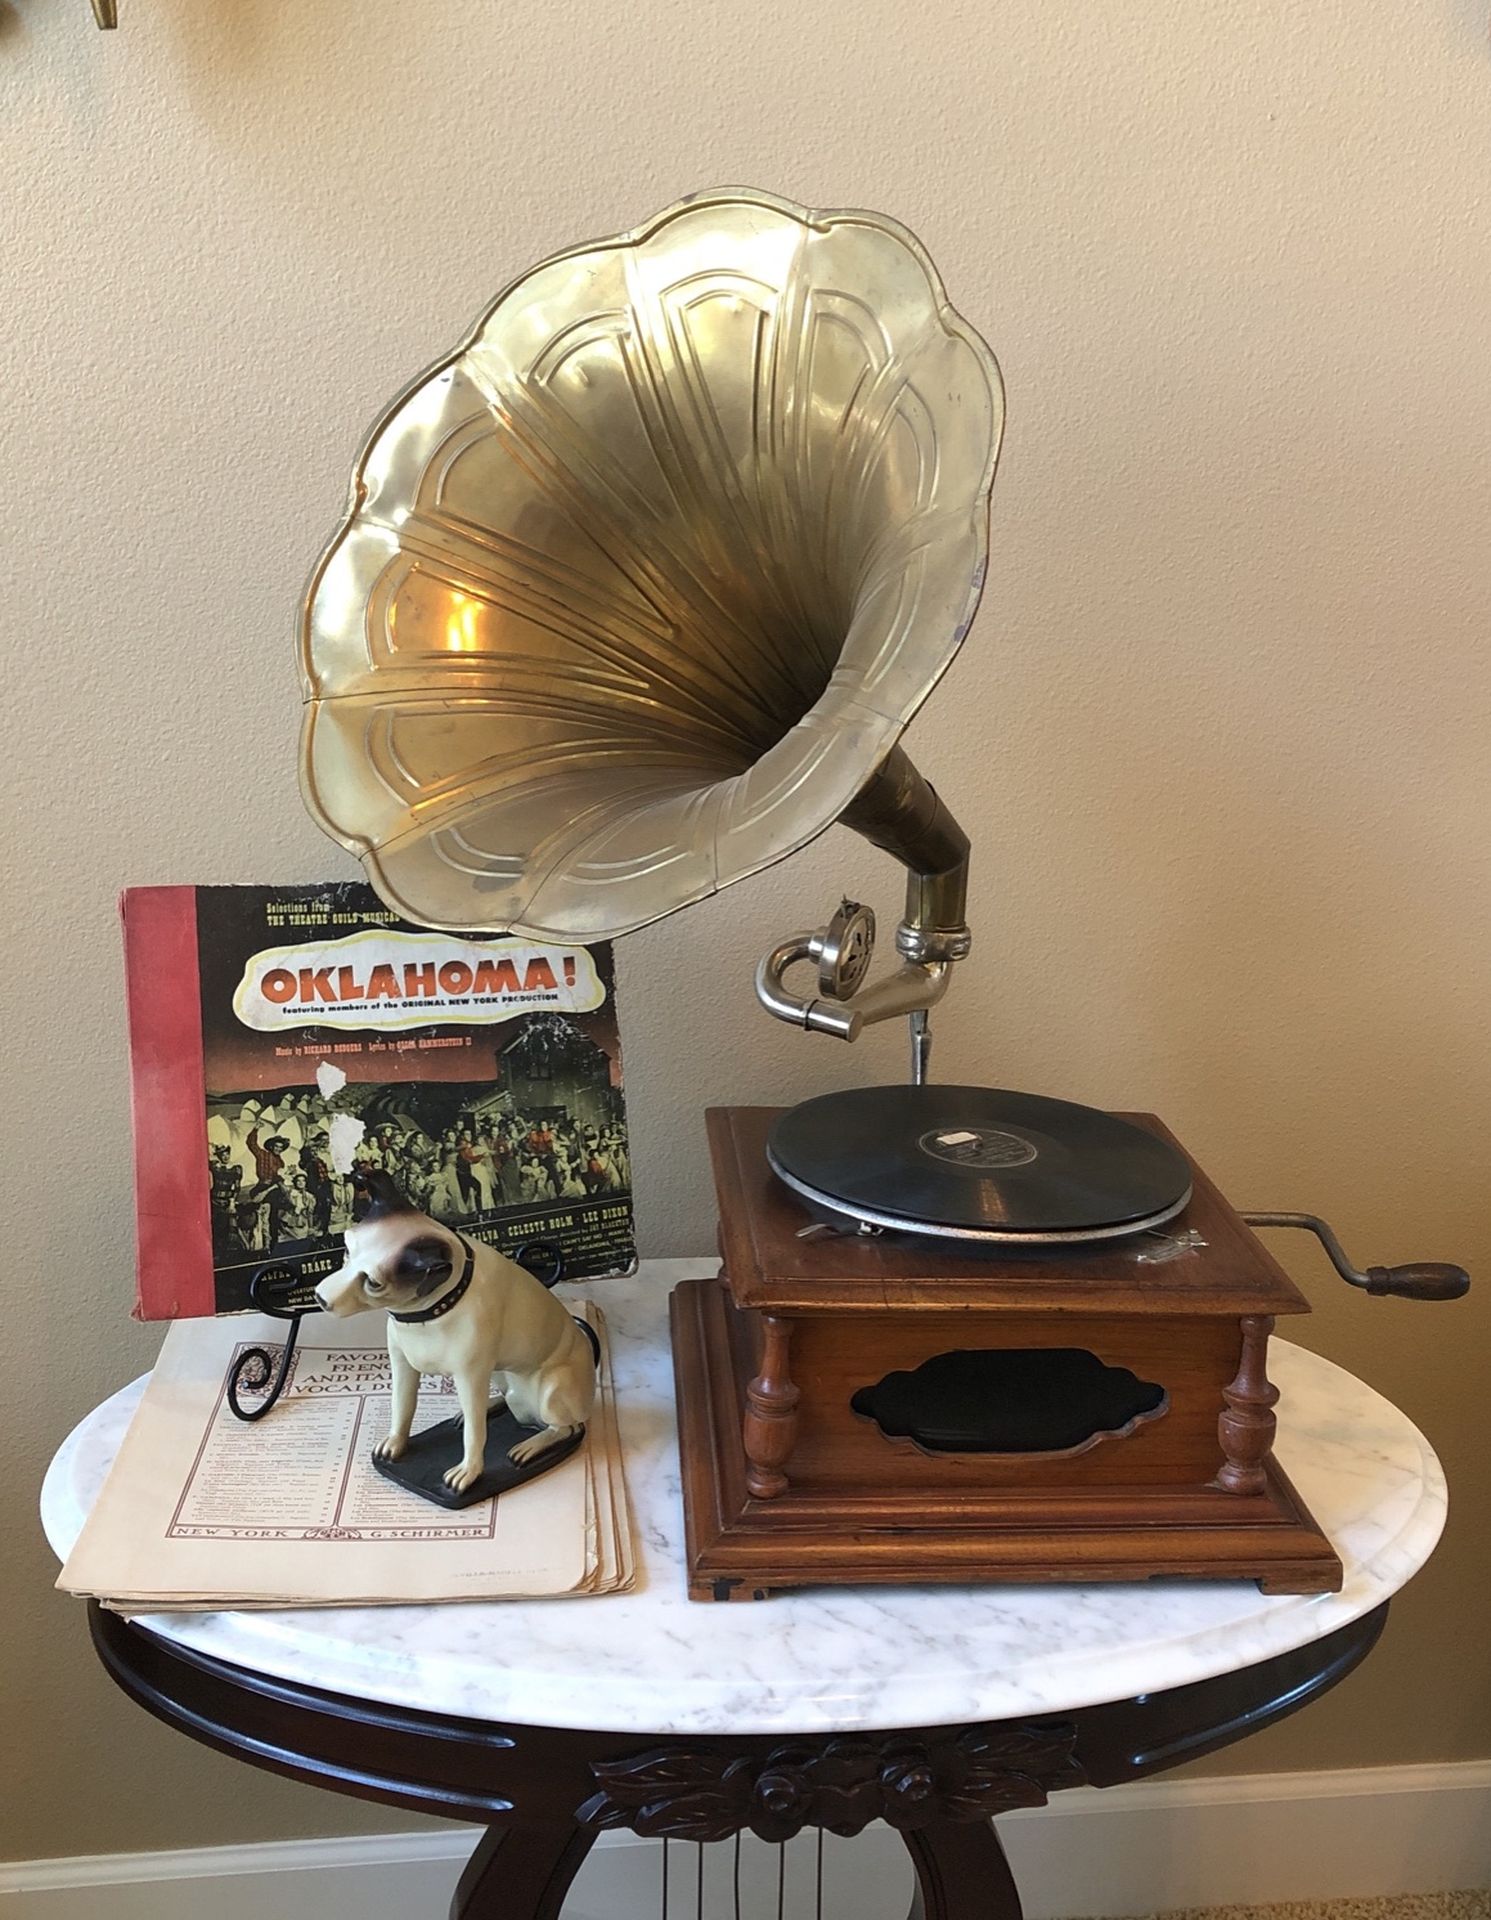 Reproduction vintage record player with dog